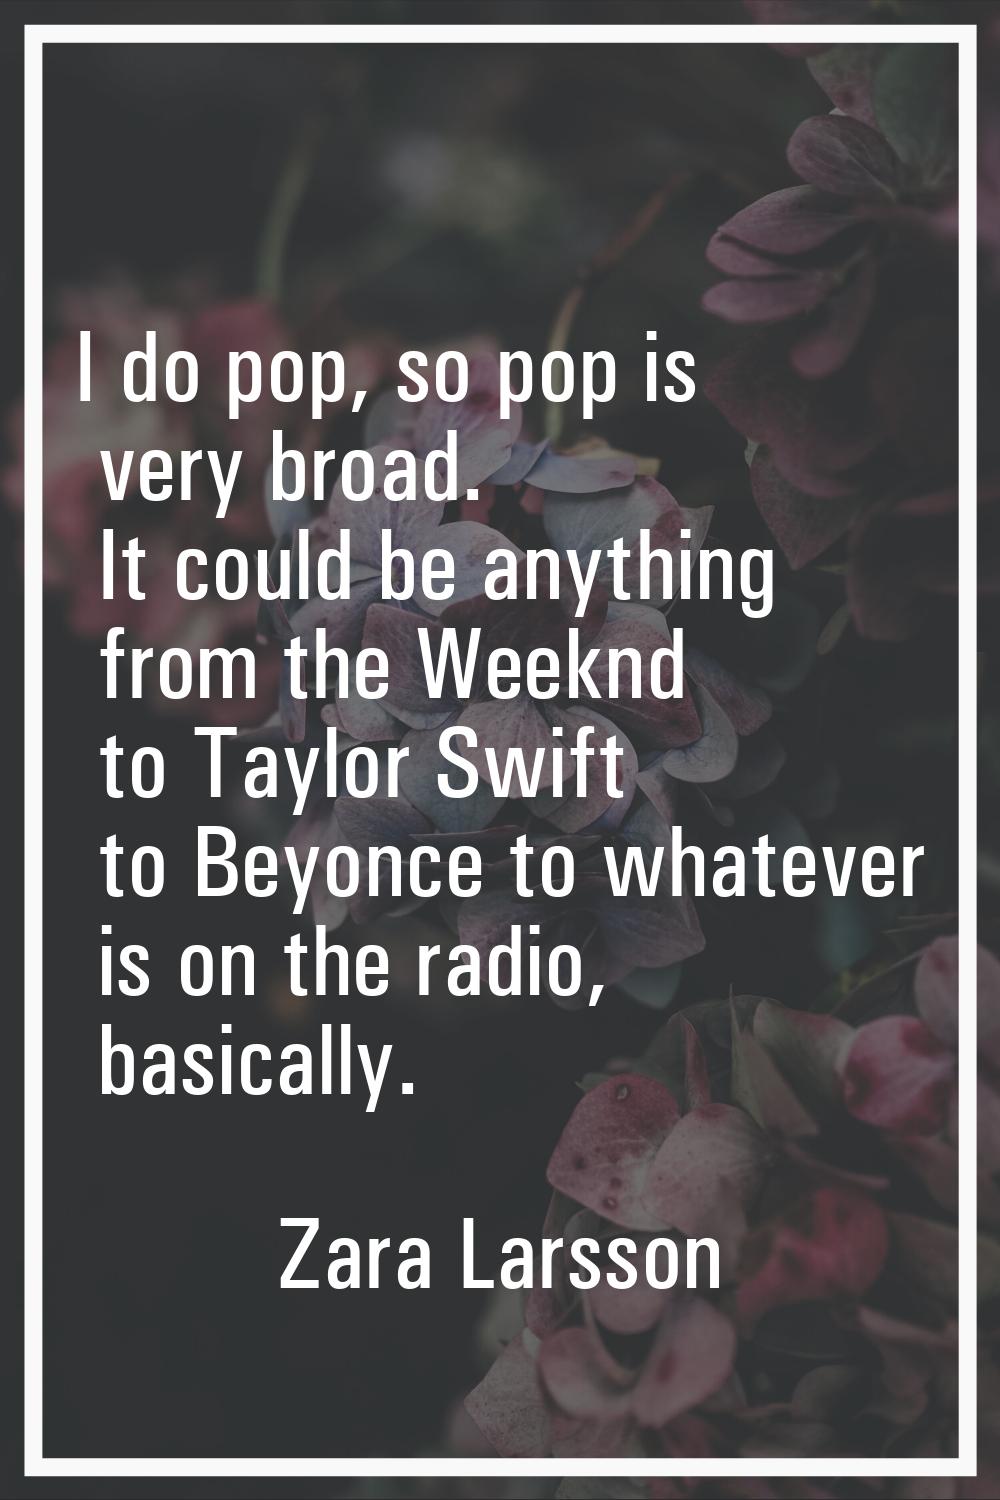 I do pop, so pop is very broad. It could be anything from the Weeknd to Taylor Swift to Beyonce to 